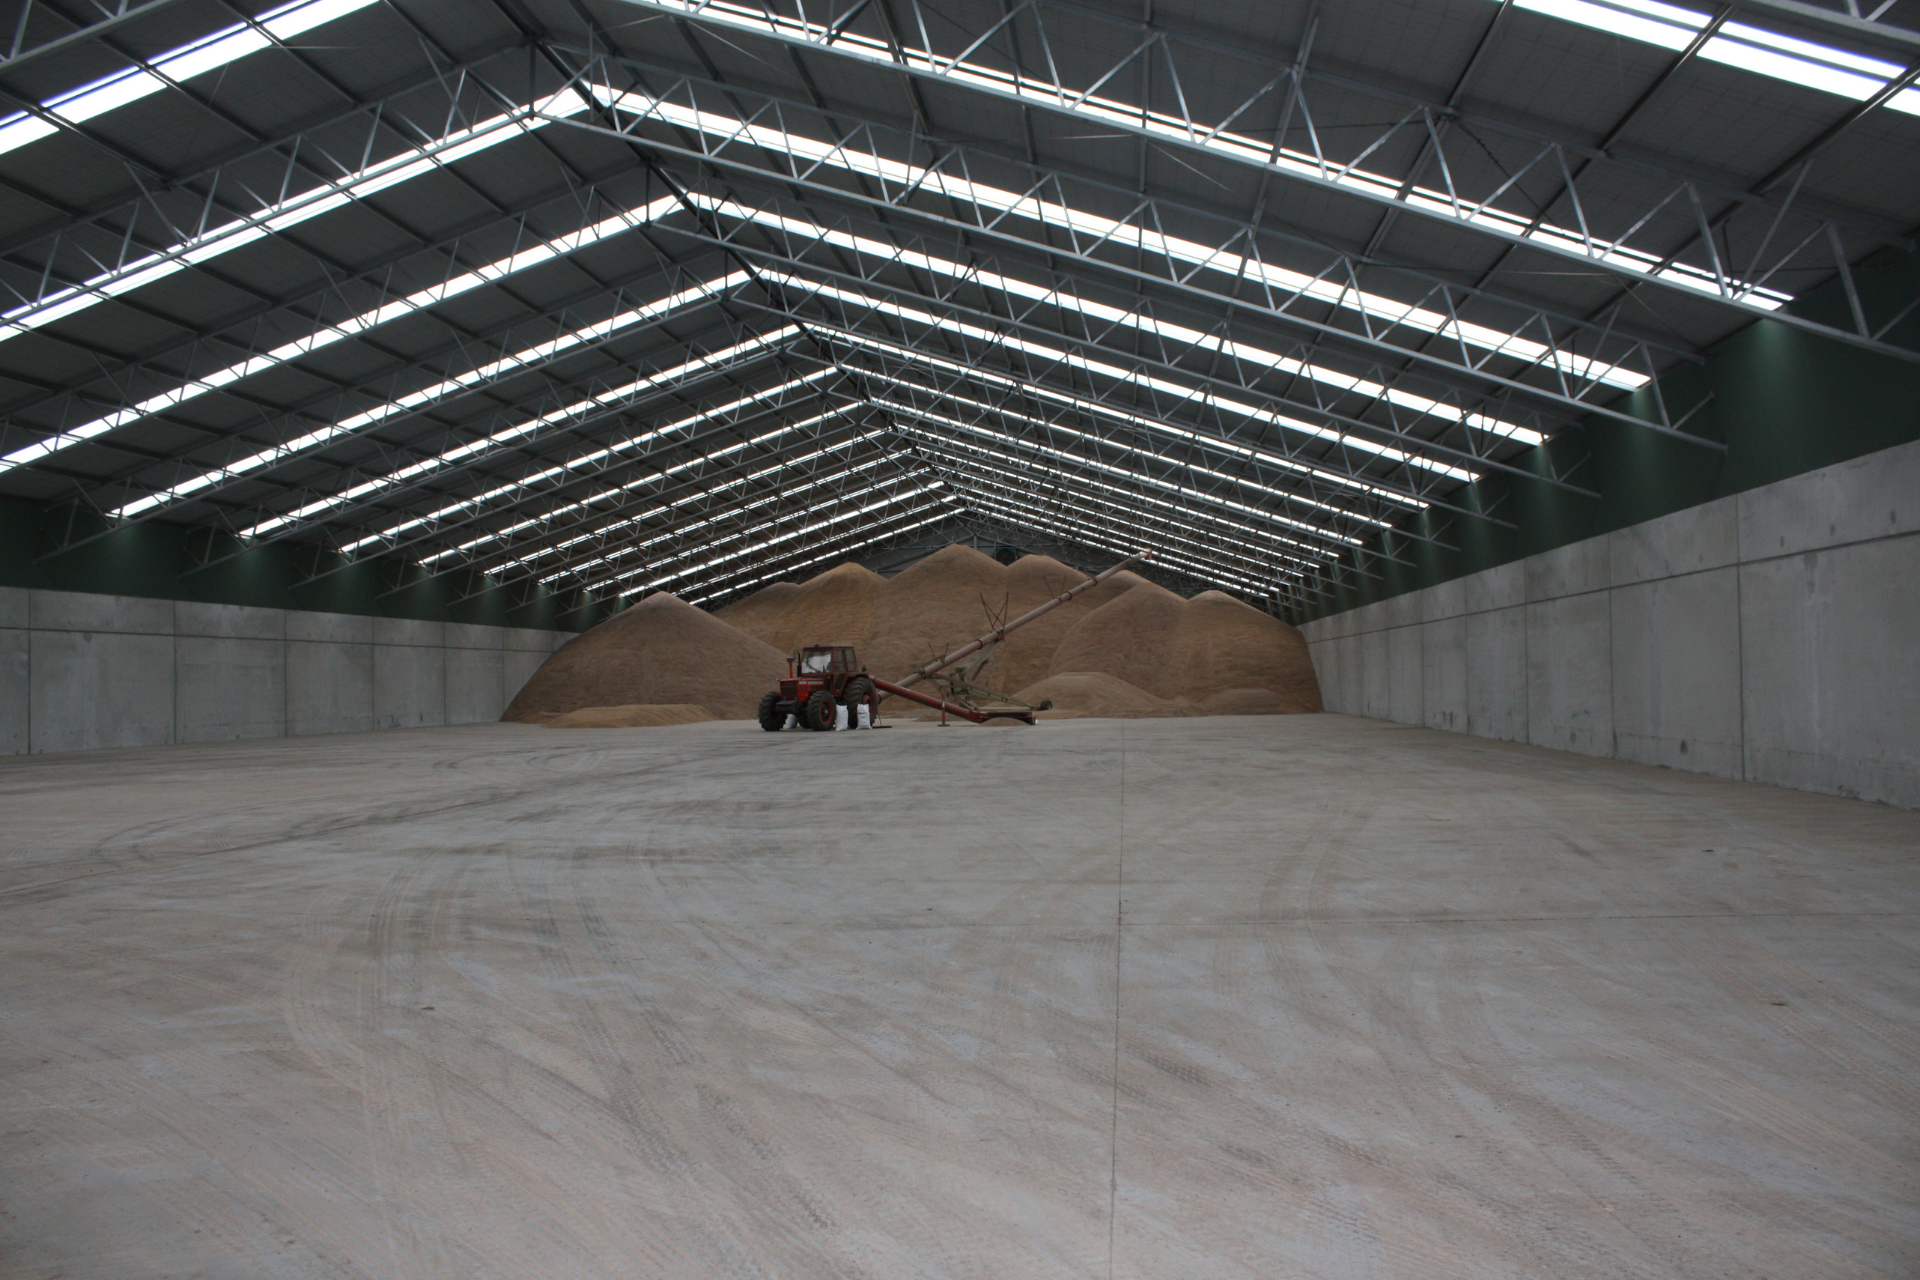 You are currently viewing 102m x 36m x 6m grain shed with concrete panel walls